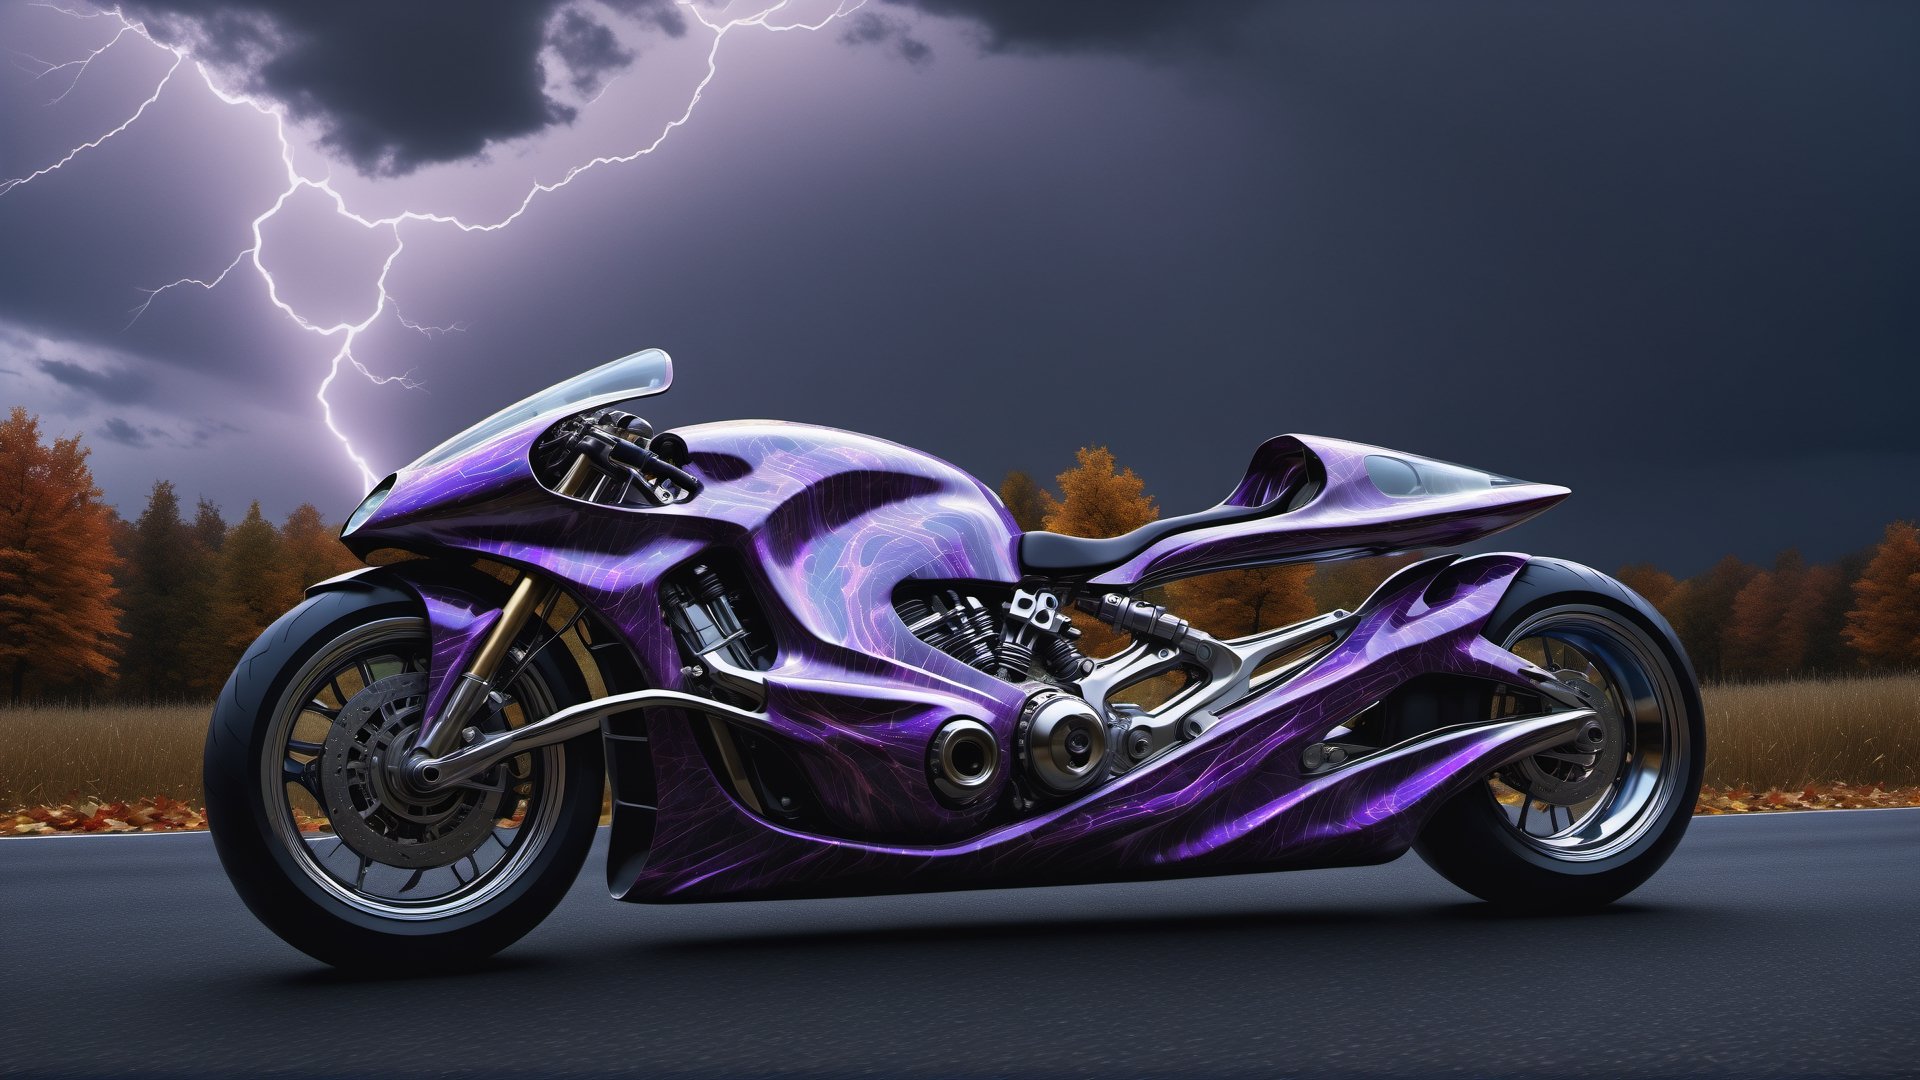 (best quality,  highres,  ultra high resolution,  masterpiece,  realistic,  extremely photograph,  detailed photo,  8K wallpaper,  intricate detail,  film grains),  luxurious  parametric superbike gp style with a skull with bat wings in metal and marble in parametric style inspired by the architecture of Zaha Hadid,  marble and iridescent glass, on the road forest autom, otoño, leafs with a rainbow effect,  on a night of terror in autumn,  with clouds dark and lightning in the sky This is a photographic scene designed with advanced photography,  CGI,  and VFX parameters,  in high definition,  ensuring flawless execution. high level of intricacy in the image